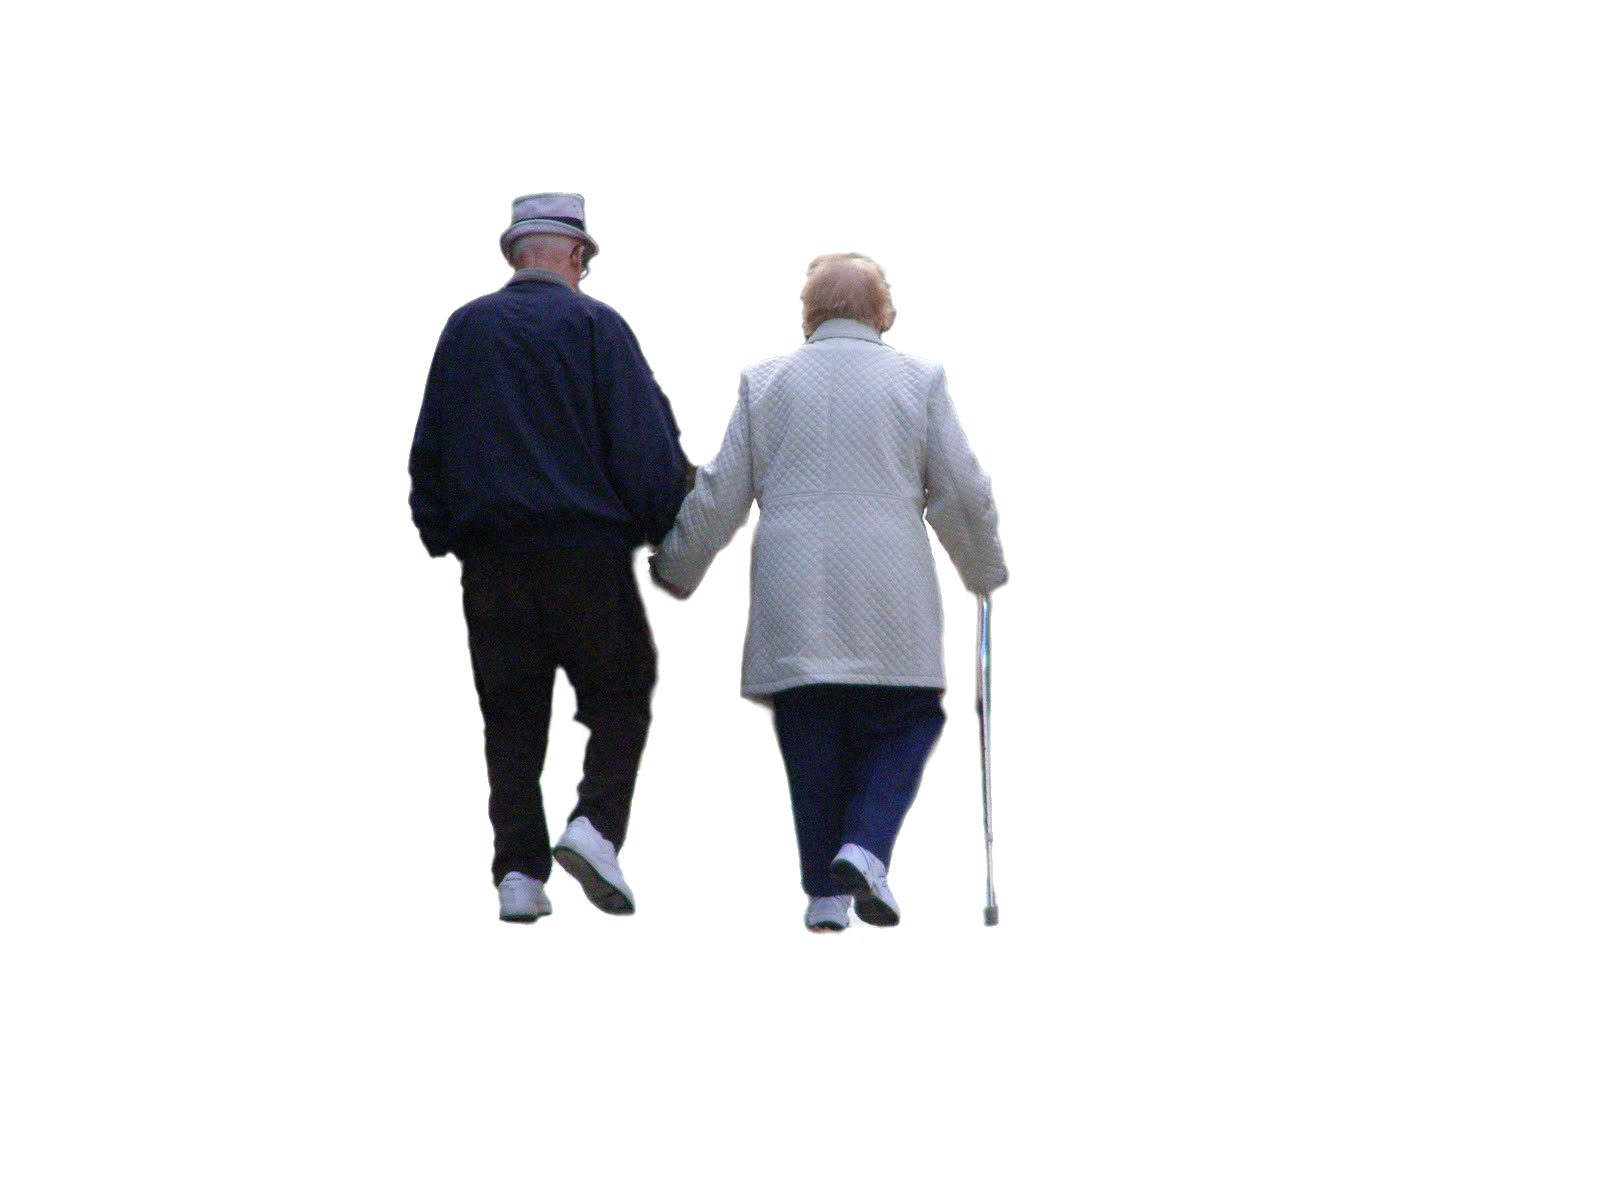 Silhouette Walking Old Age People Free HD Image Clipart